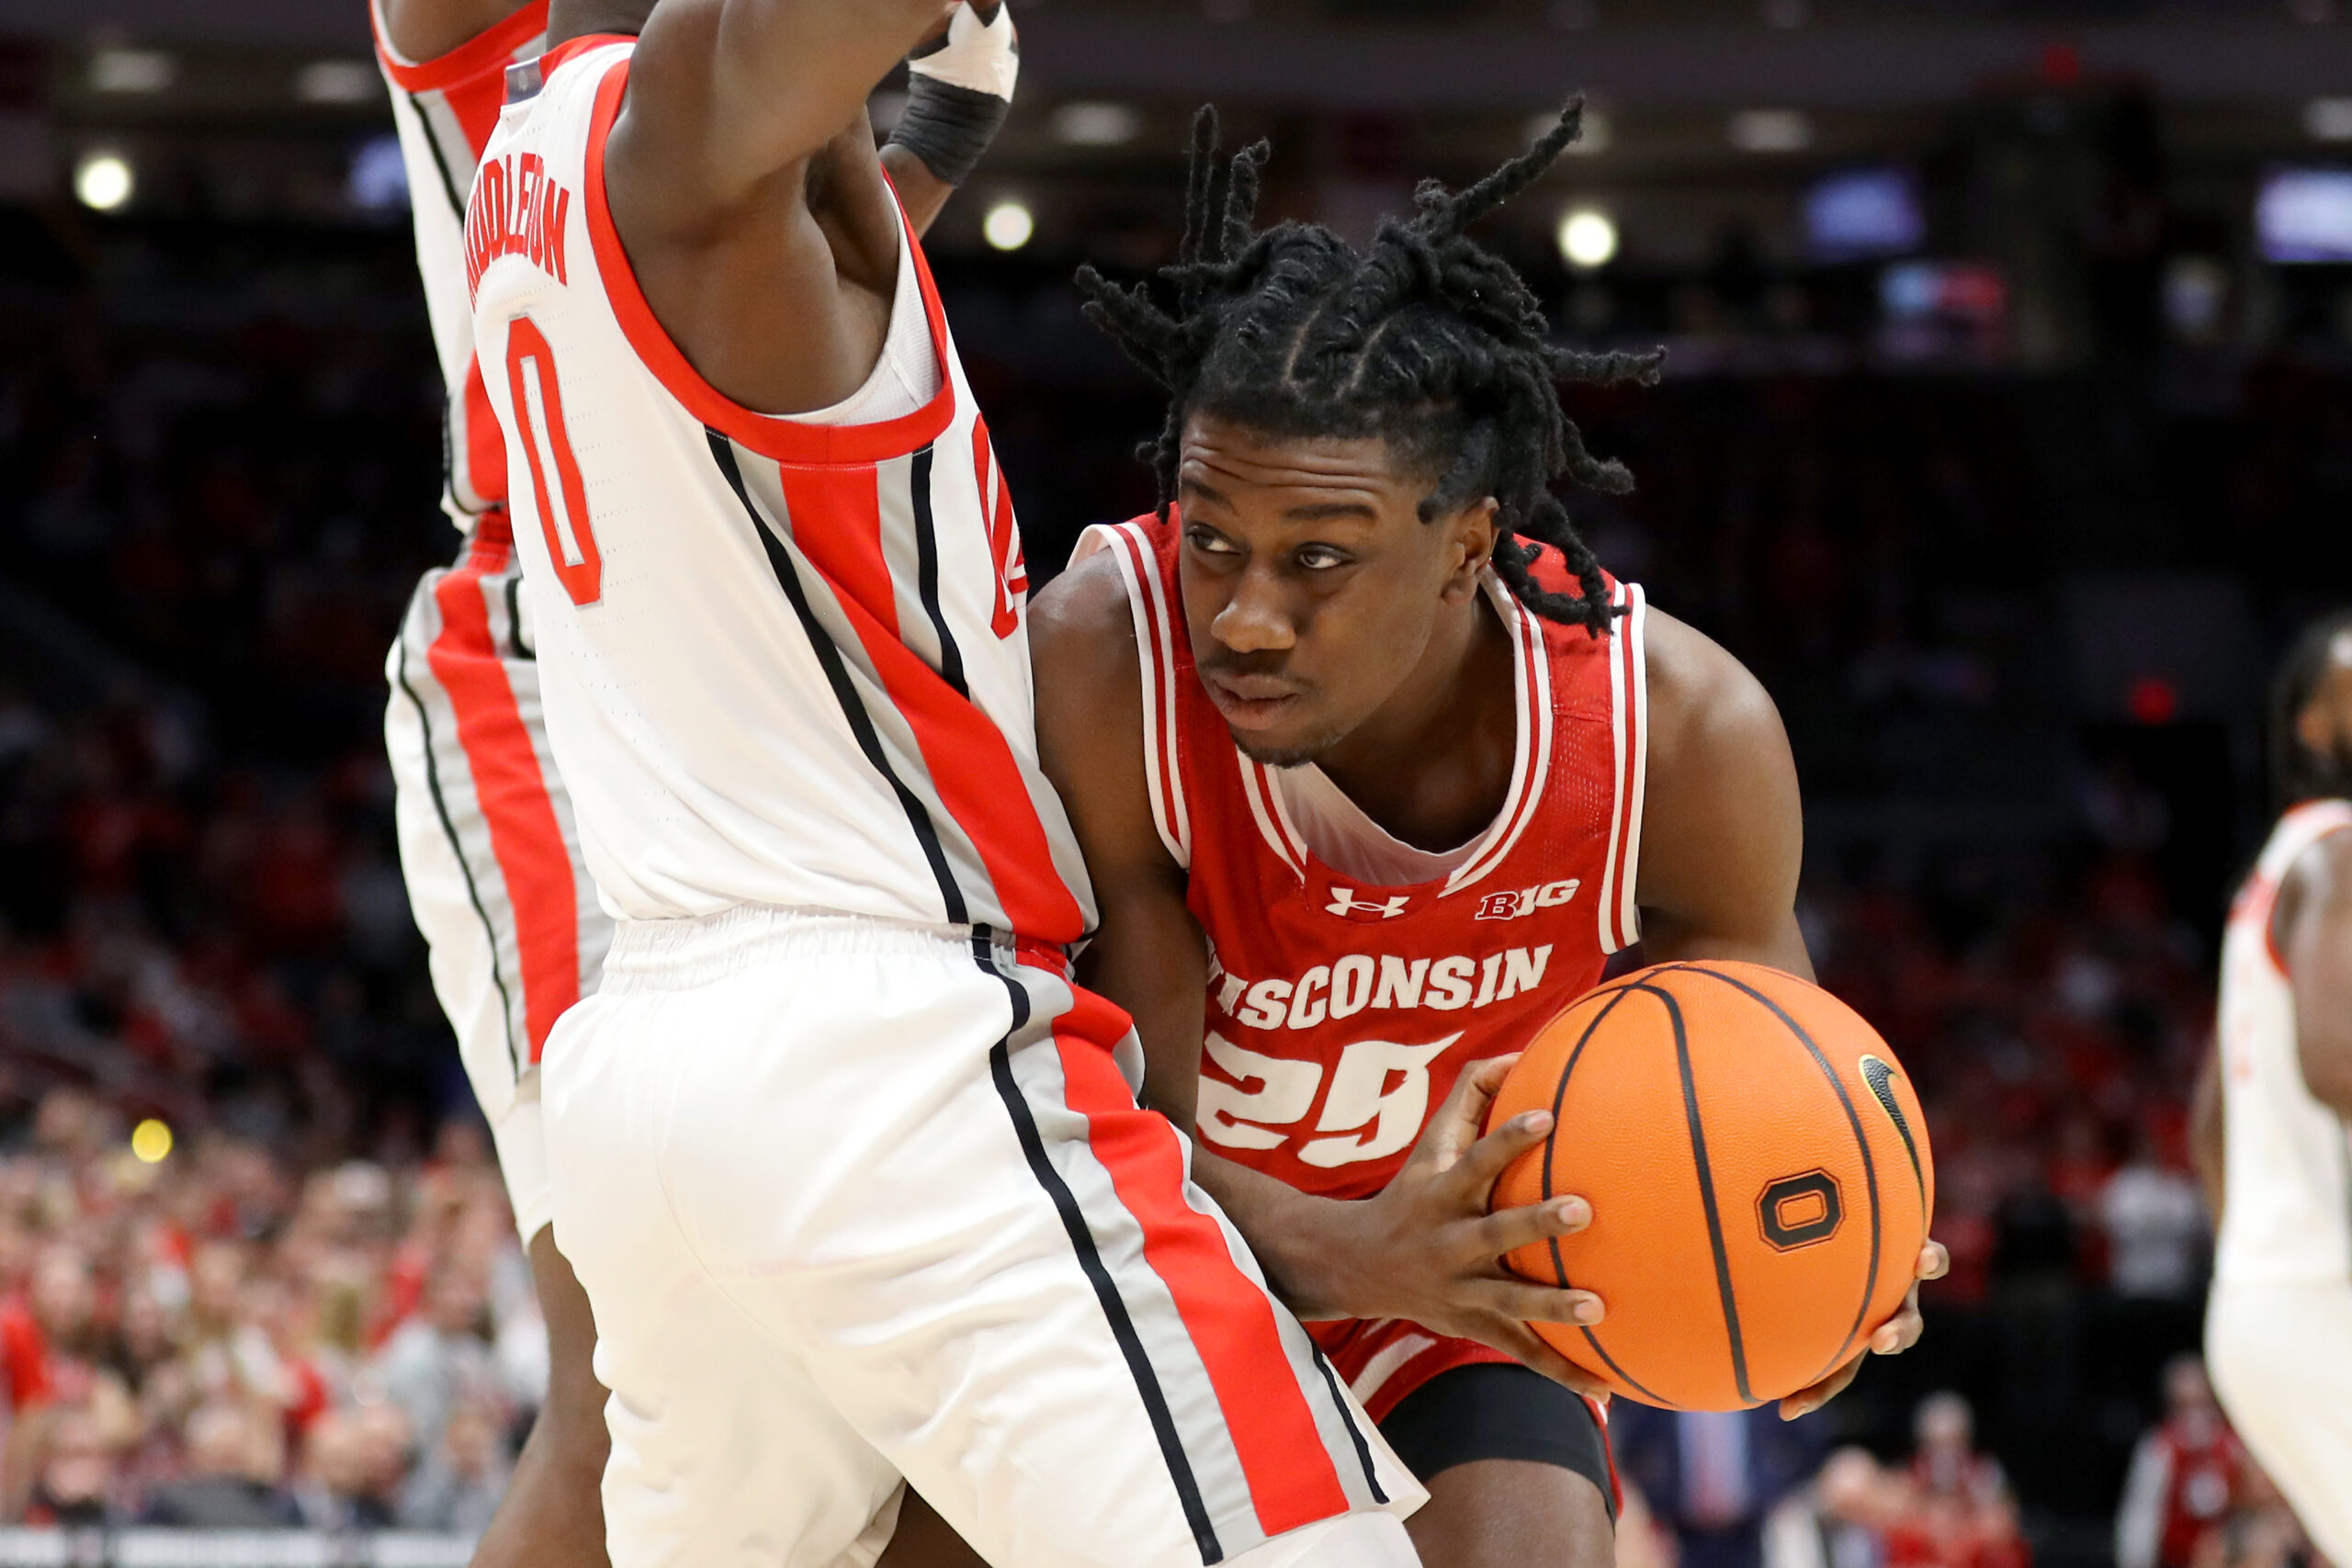 Wisconsin basketball freshman guard John Blackwell was held out of UW's game on Saturday at Rutgers